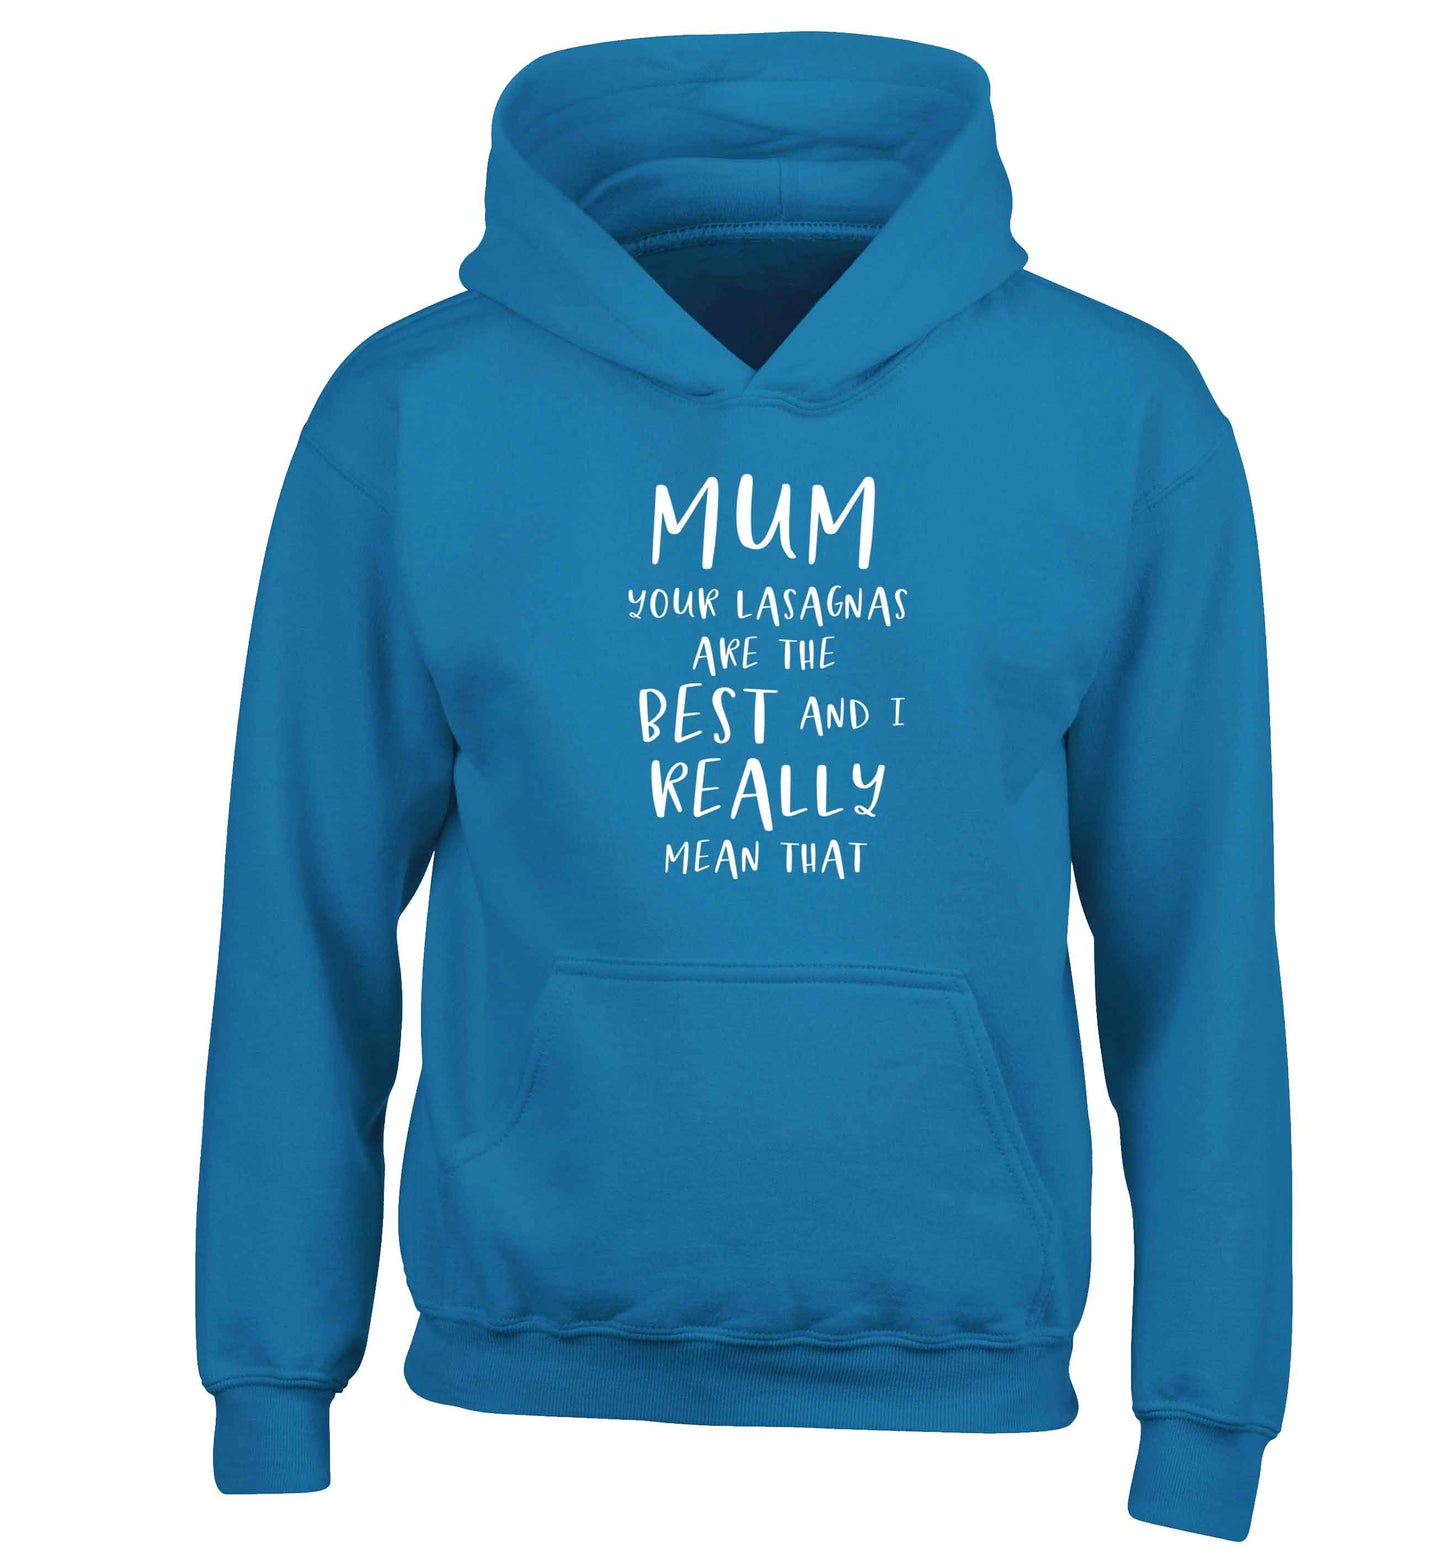 Funny gifts for your mum on mother's dayor her birthday! Mum your lasagnas are the best and I really mean that children's blue hoodie 12-13 Years